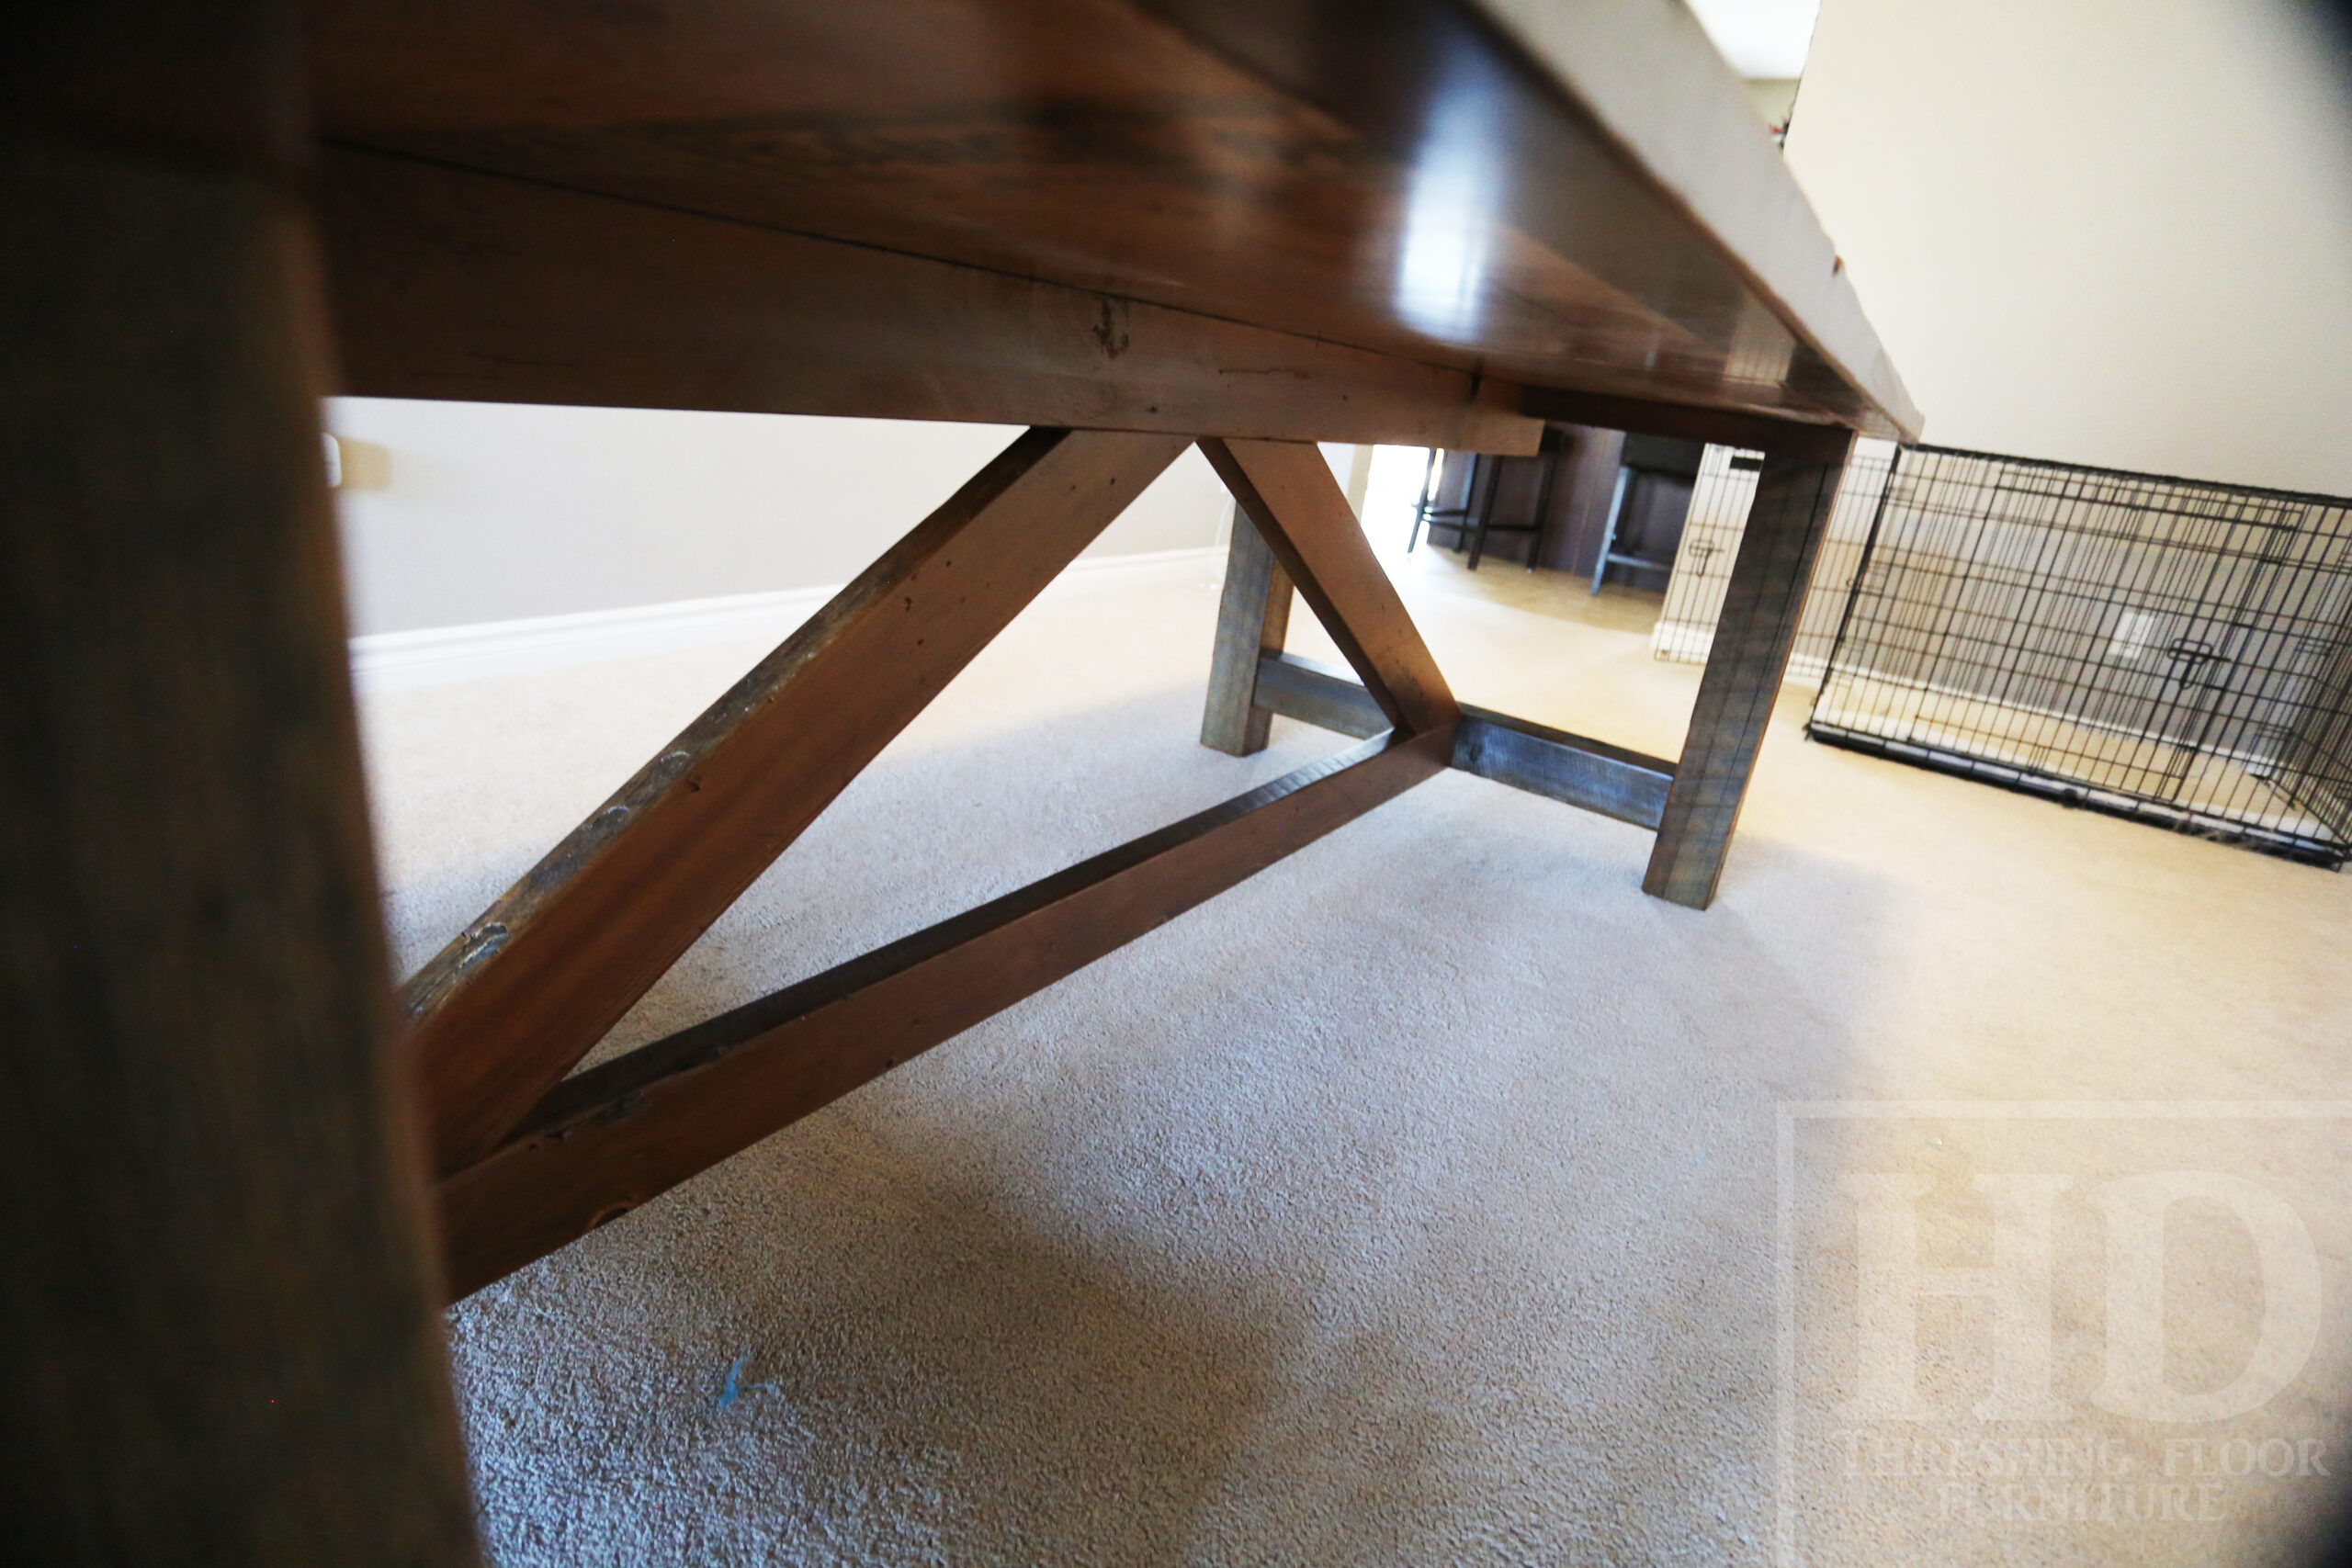 Project details: 8.5' Reclaimed Wood Table we made for a Cambridge, Ontario home - 42" wide - Frame Base - Old Growth Hemlock Threshing Floor Construction - Original edges & distressing maintained - Premium epoxy + matte polyurethane finish - www.table.ca